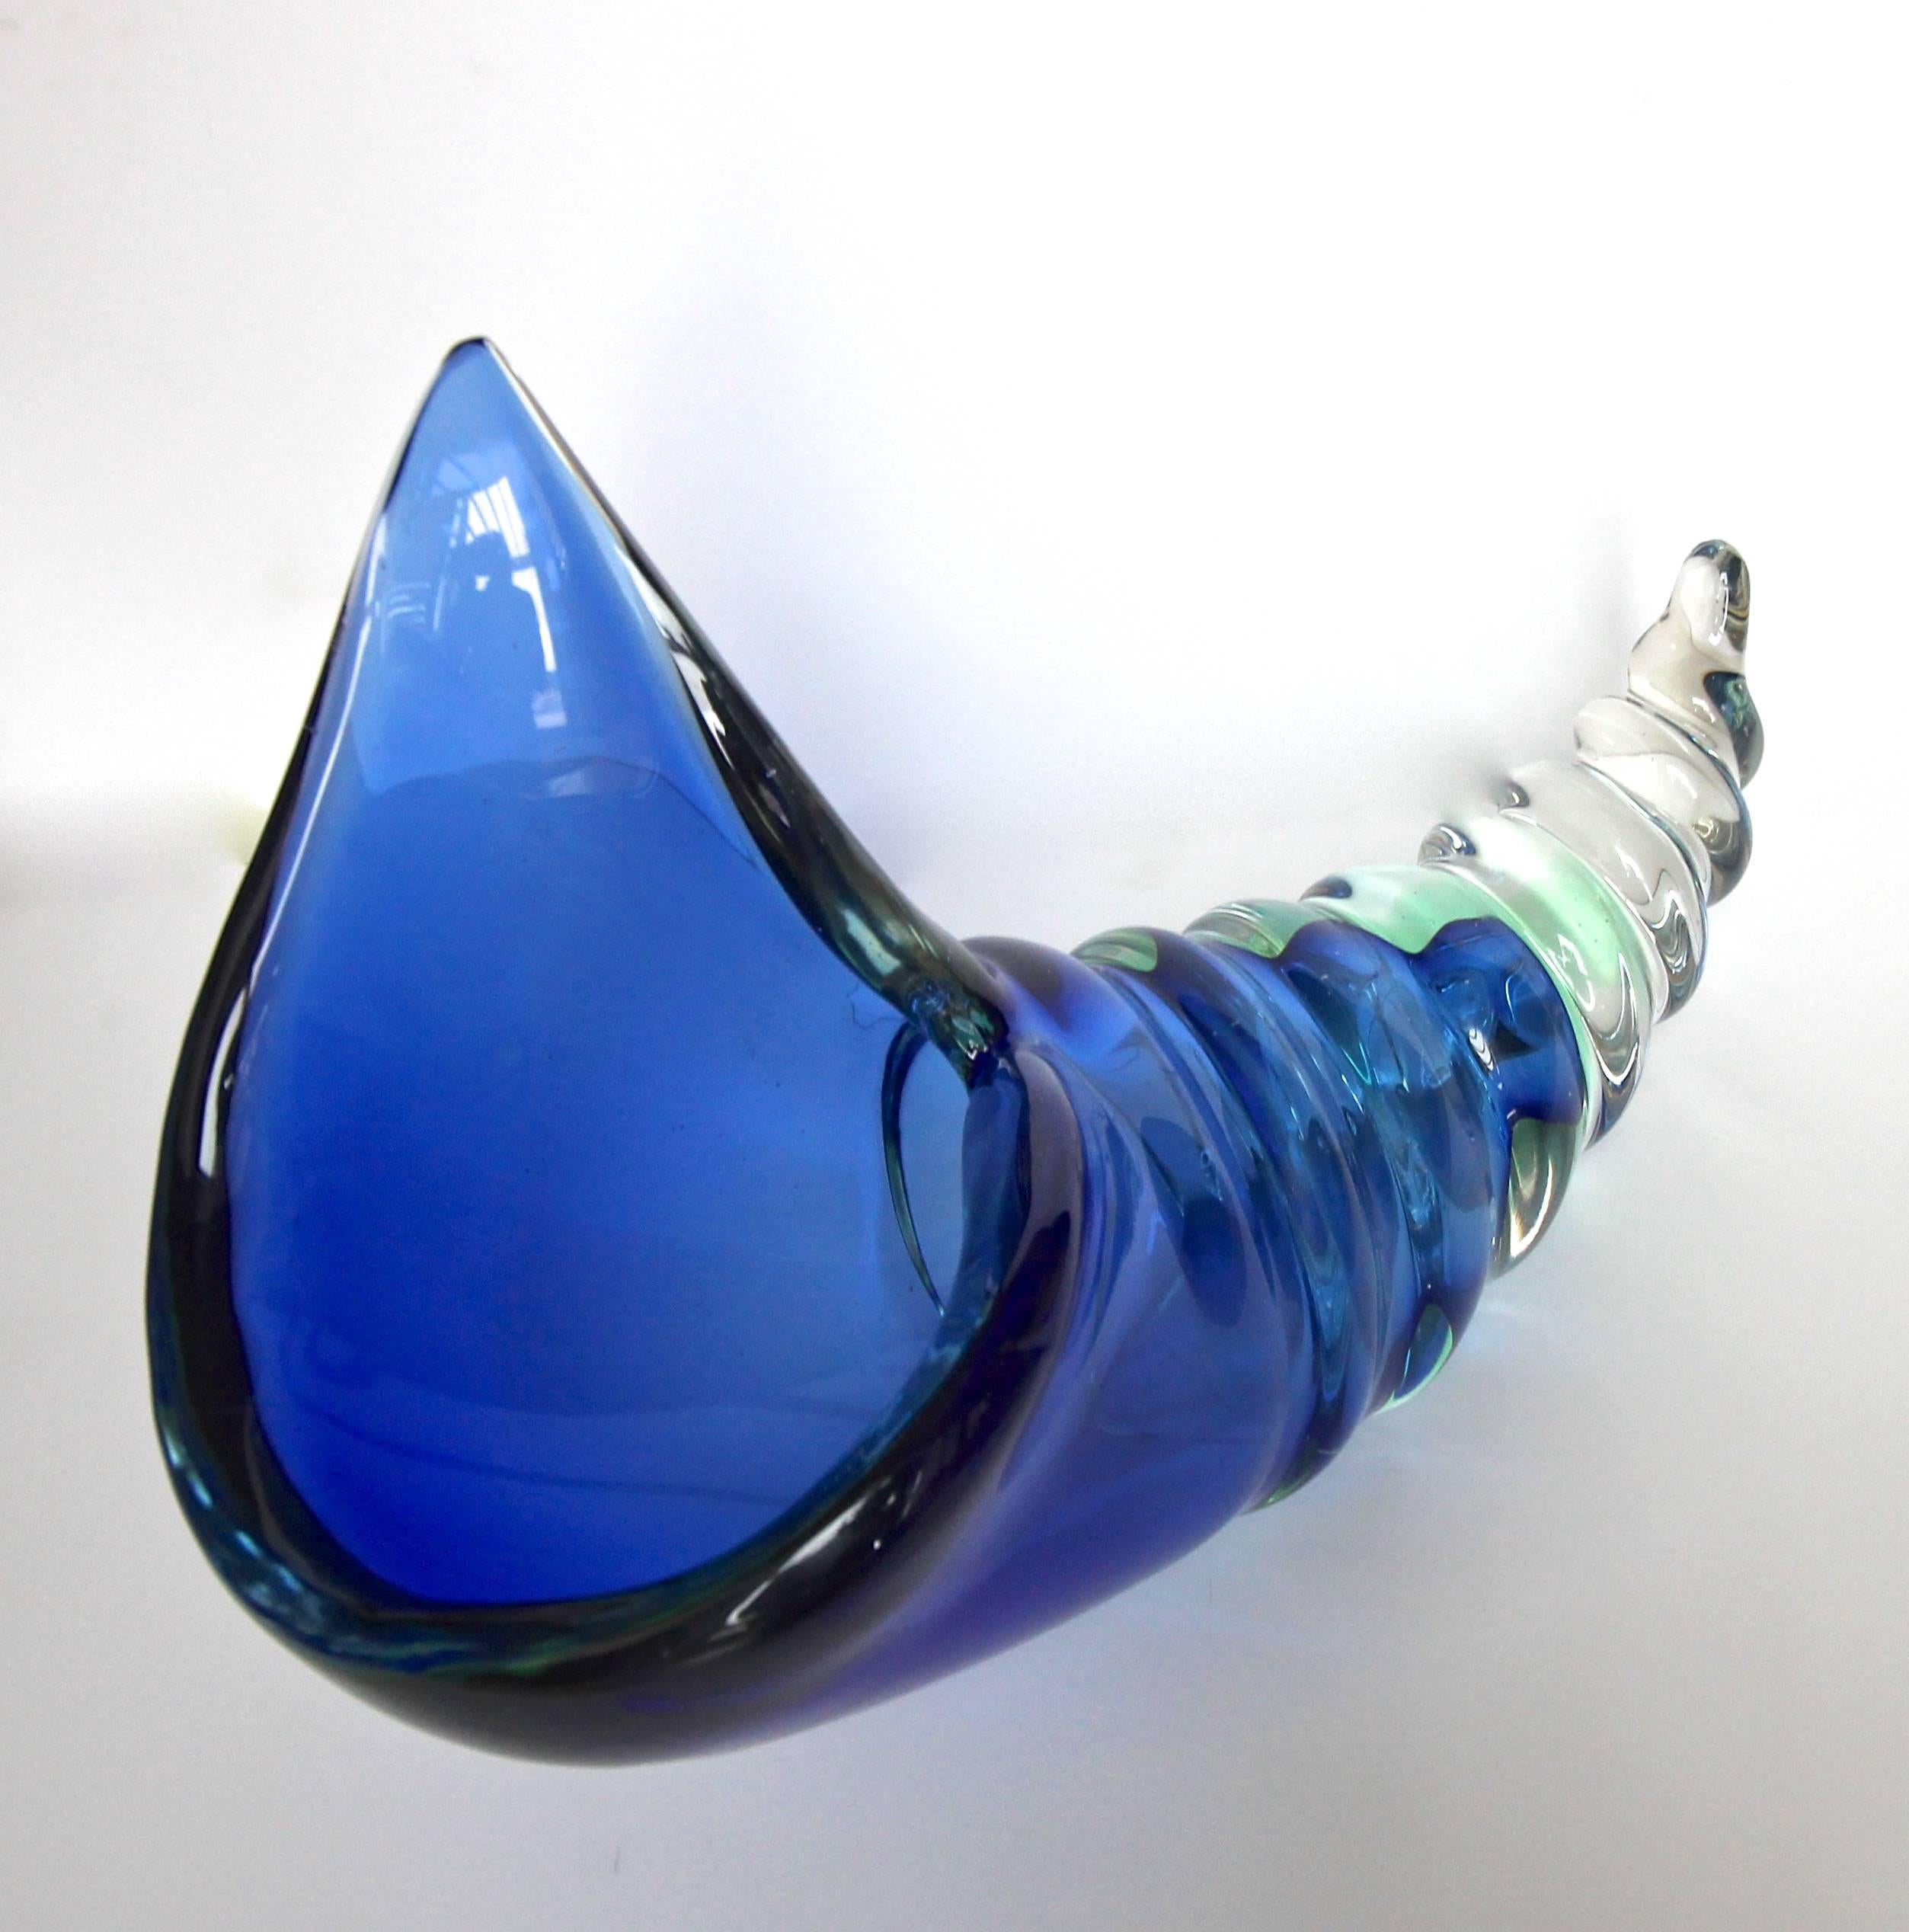 Large eye-catching seashell or conch shaped Seguso Murano Sommerso Italian glass bowl centerpiece. Thick handblown rich blue colored glass with subtle hues of agua green. Heavy in weight and large overall portions.